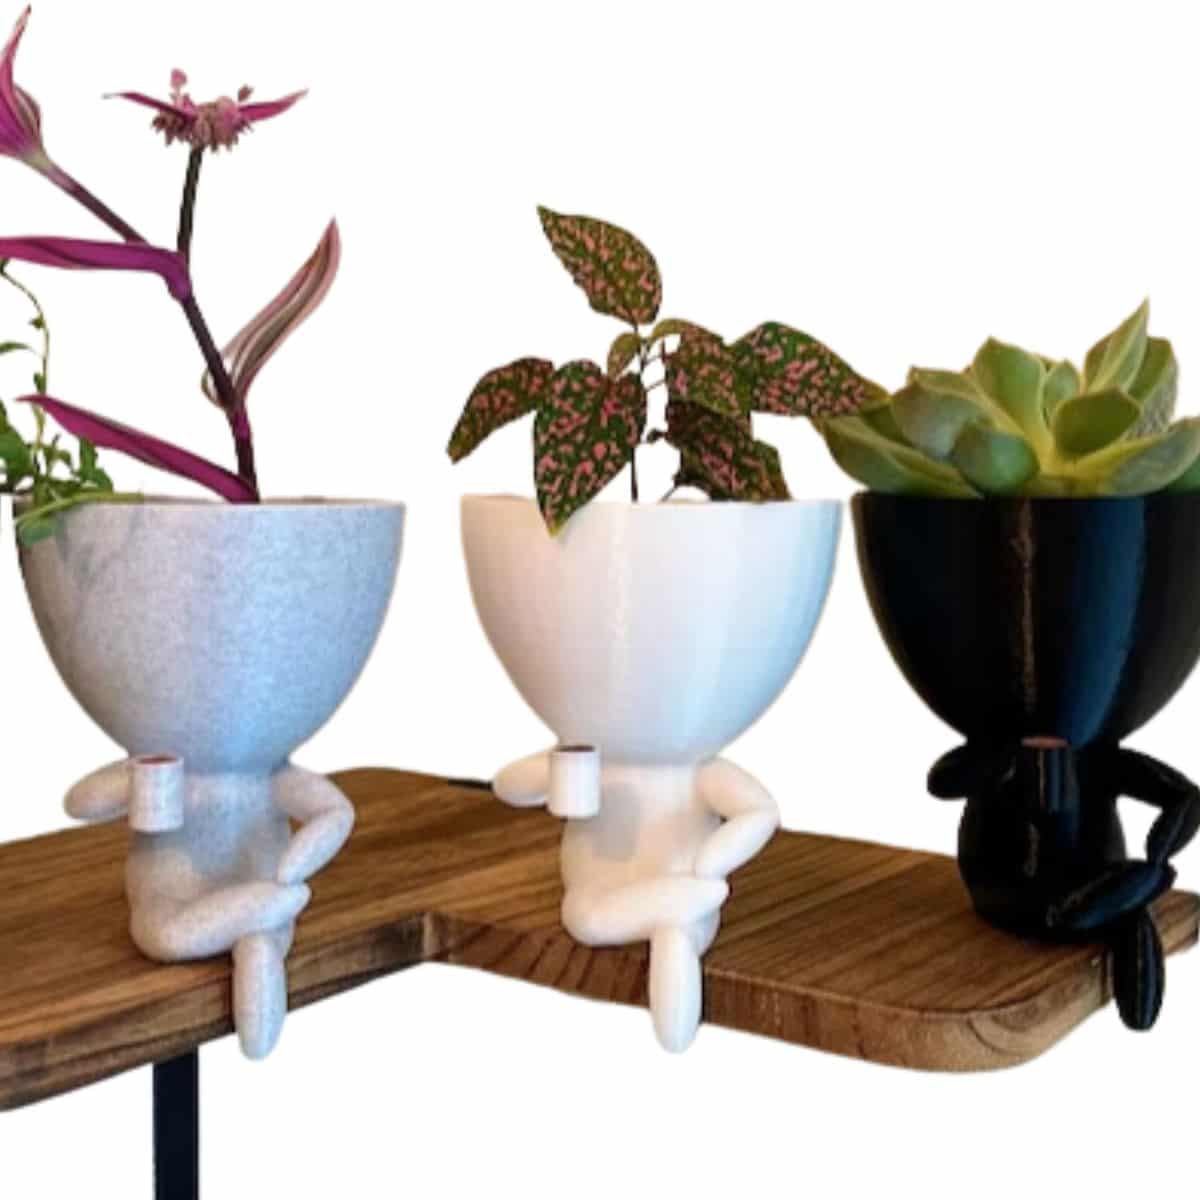 Three people planters sitting on a ledge with various plants inside from Etsy. 